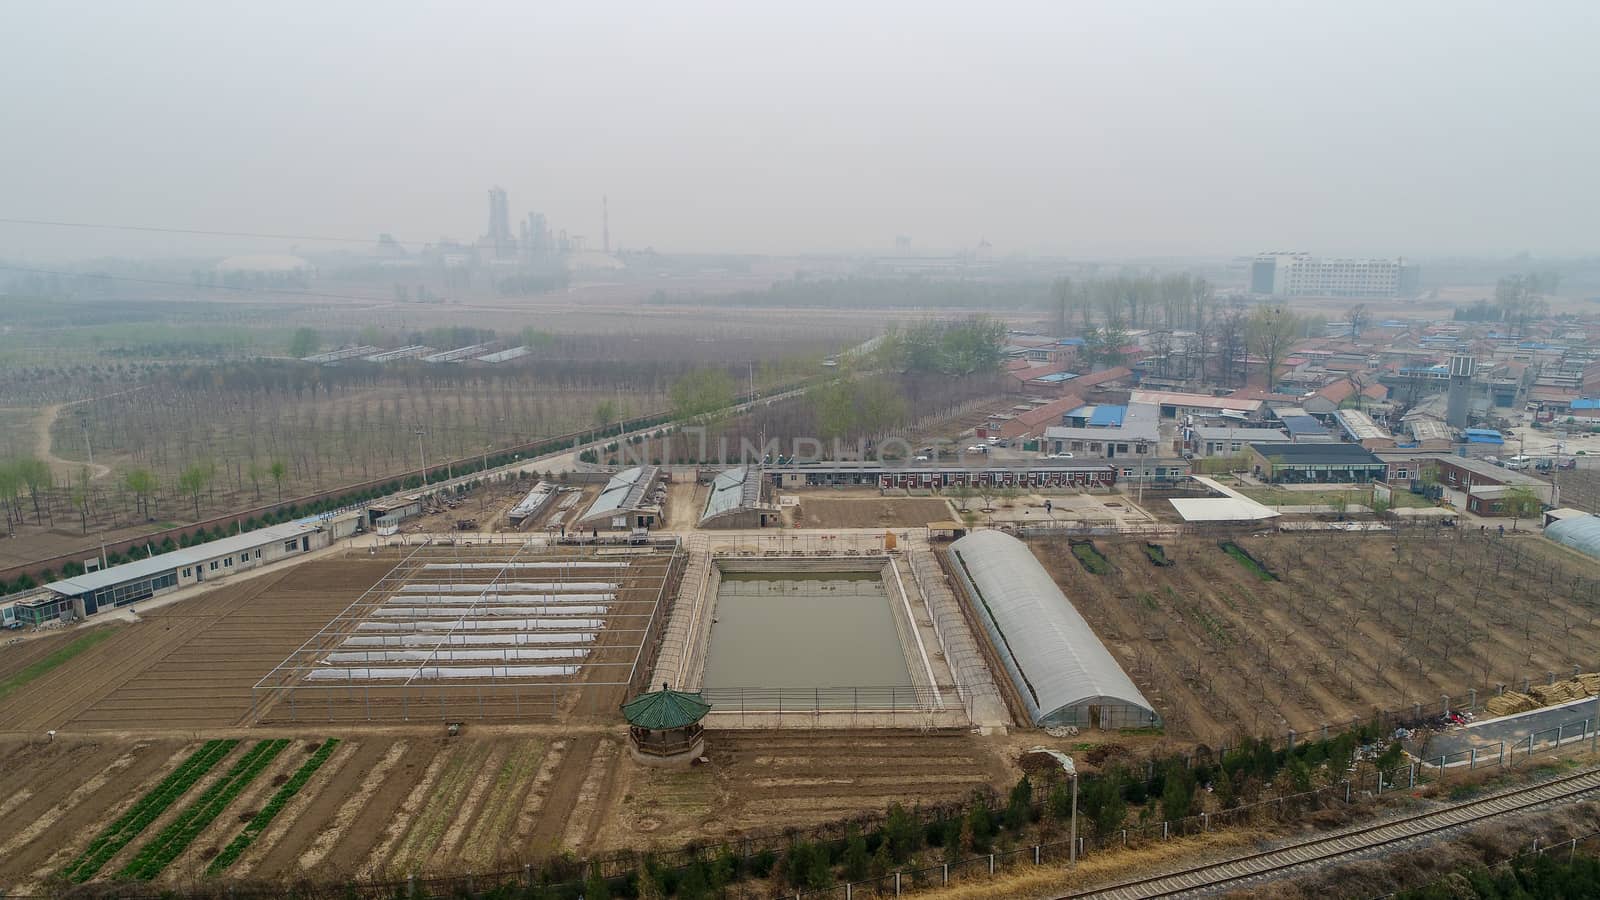 Small rural poor villages, surrounded by farm land, small factories and train tracks outside Beijing during extreme pollution gray day. China.